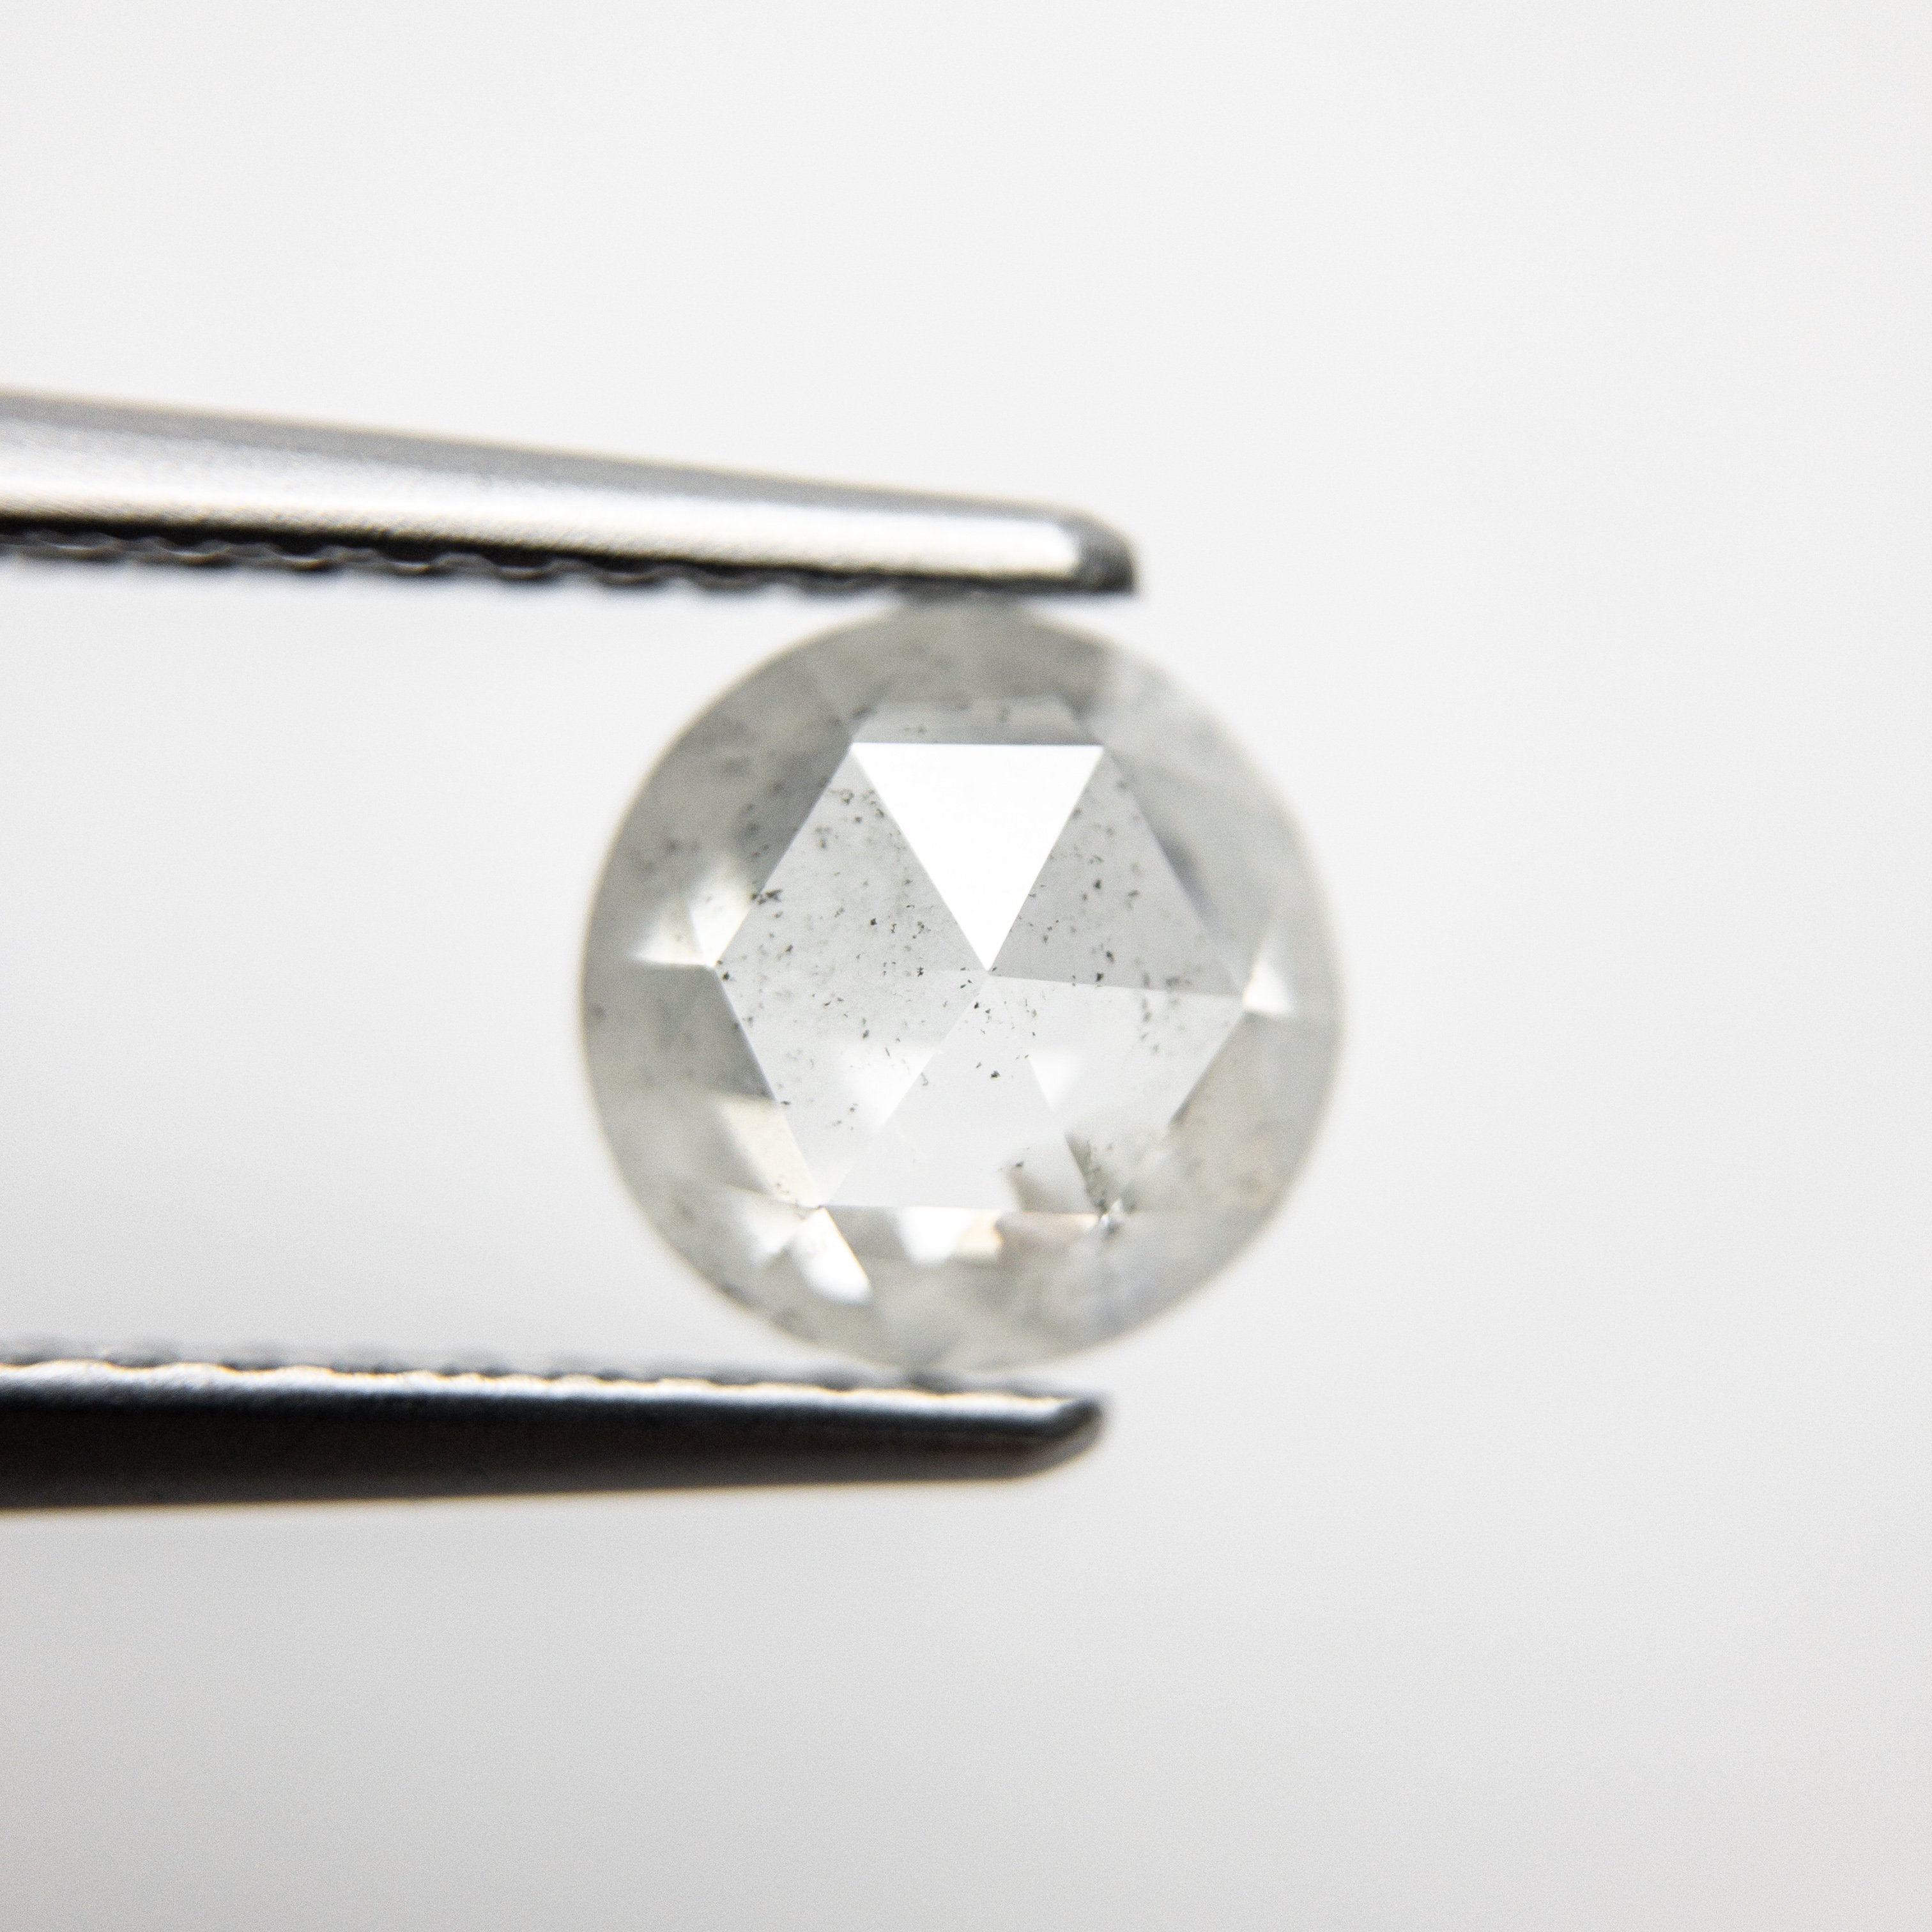 1.03ct 6.67x6.65x2.86mm Round Rosecut 18194-32 HOLD 6/15/20 D776